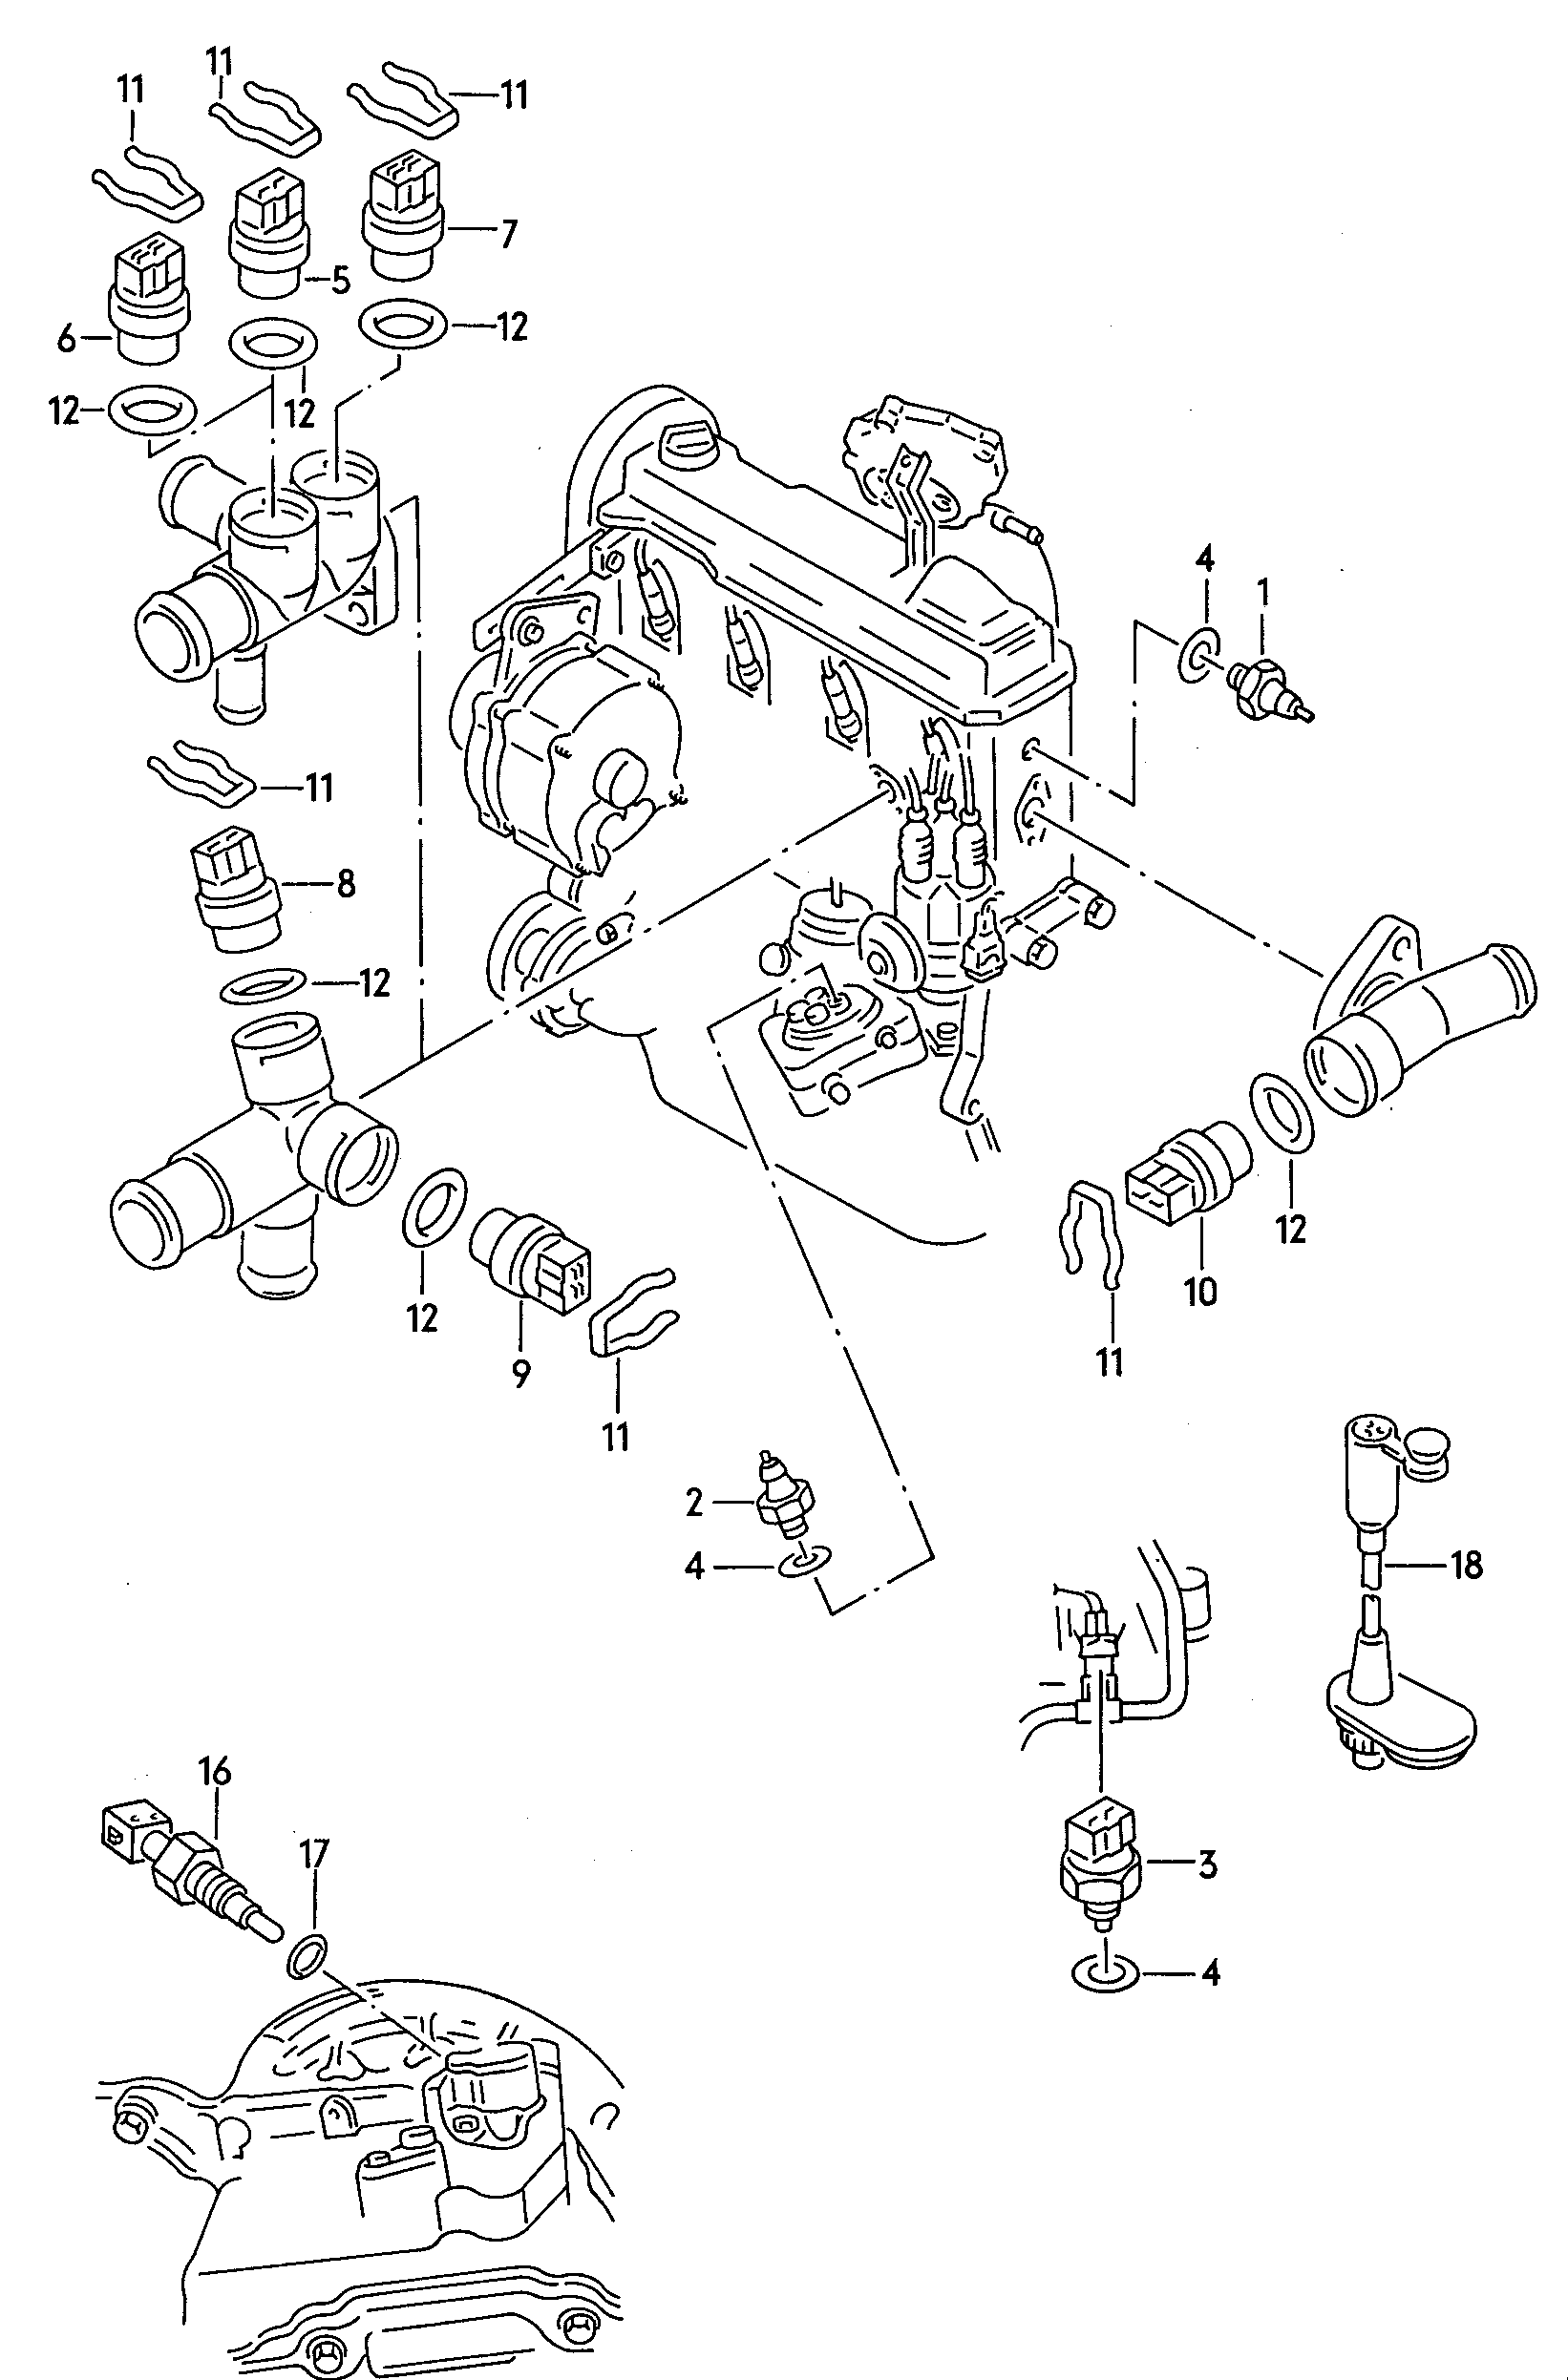 switches and senders on engine
and gearbox - Transporter(TR)  